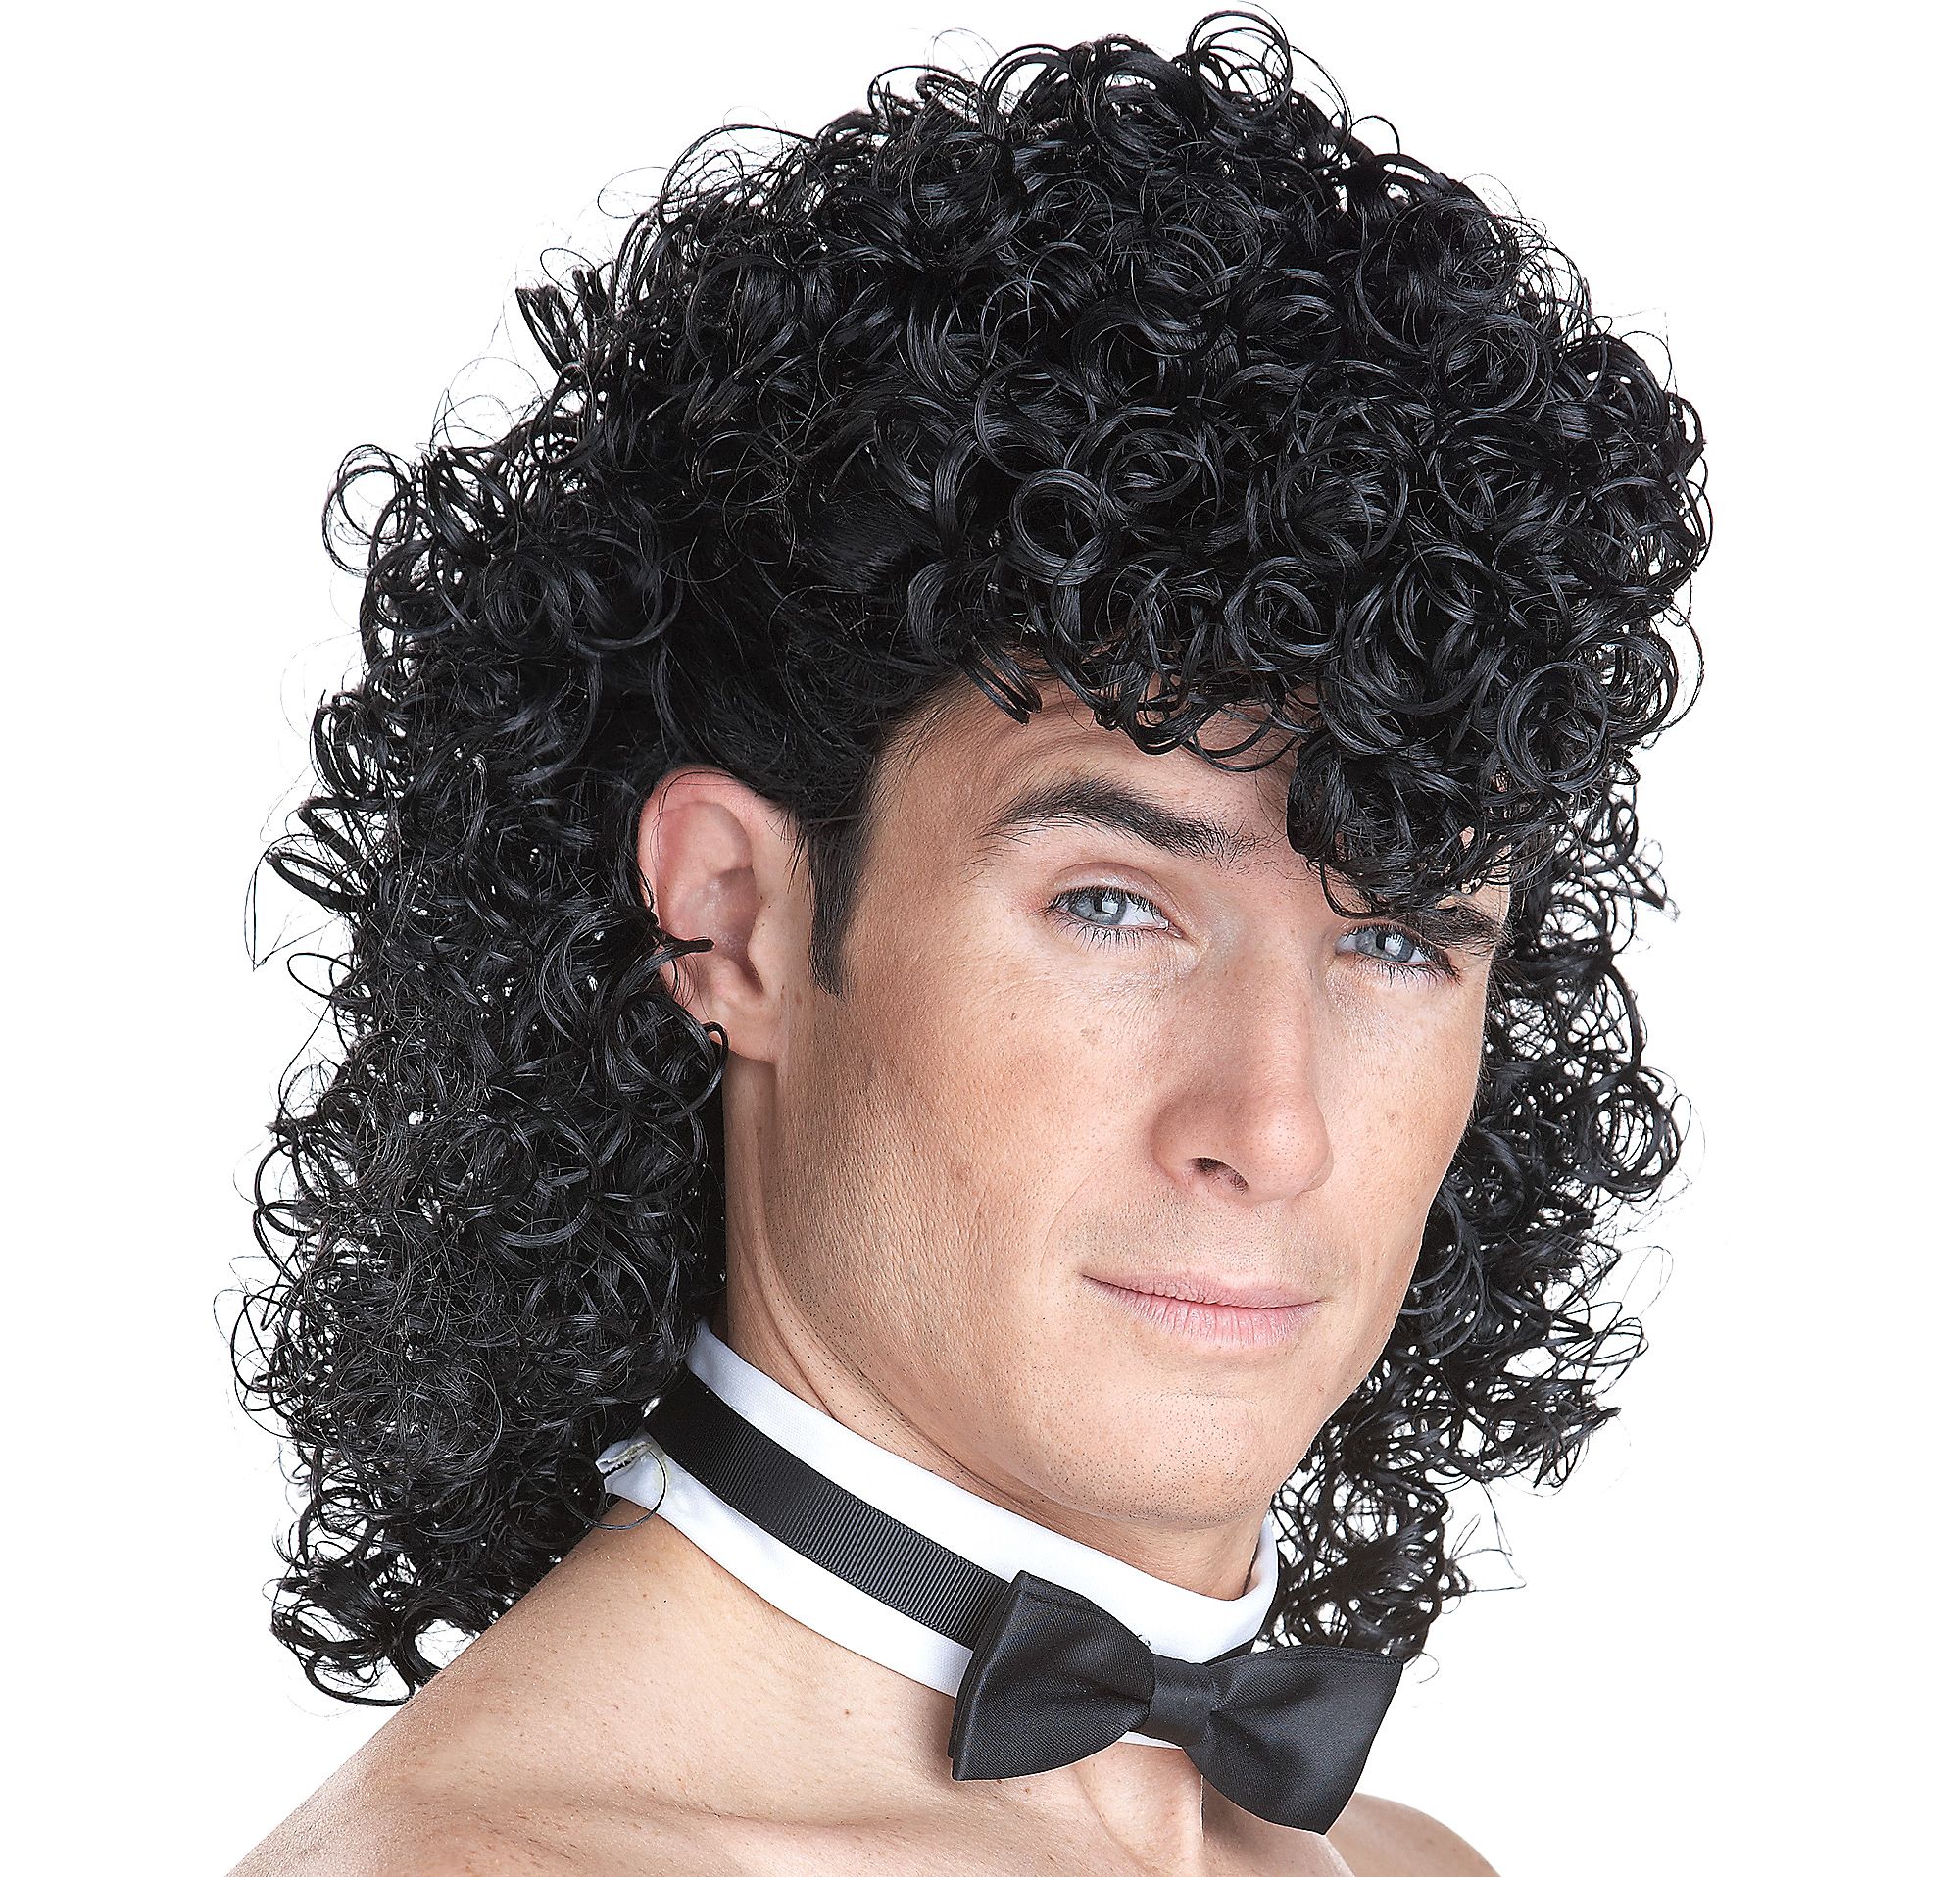 Mens Girls Night Out Curly Black Wig Set Includes Wig Cap Wig Collar Funny 80s 19519087358 Ebay